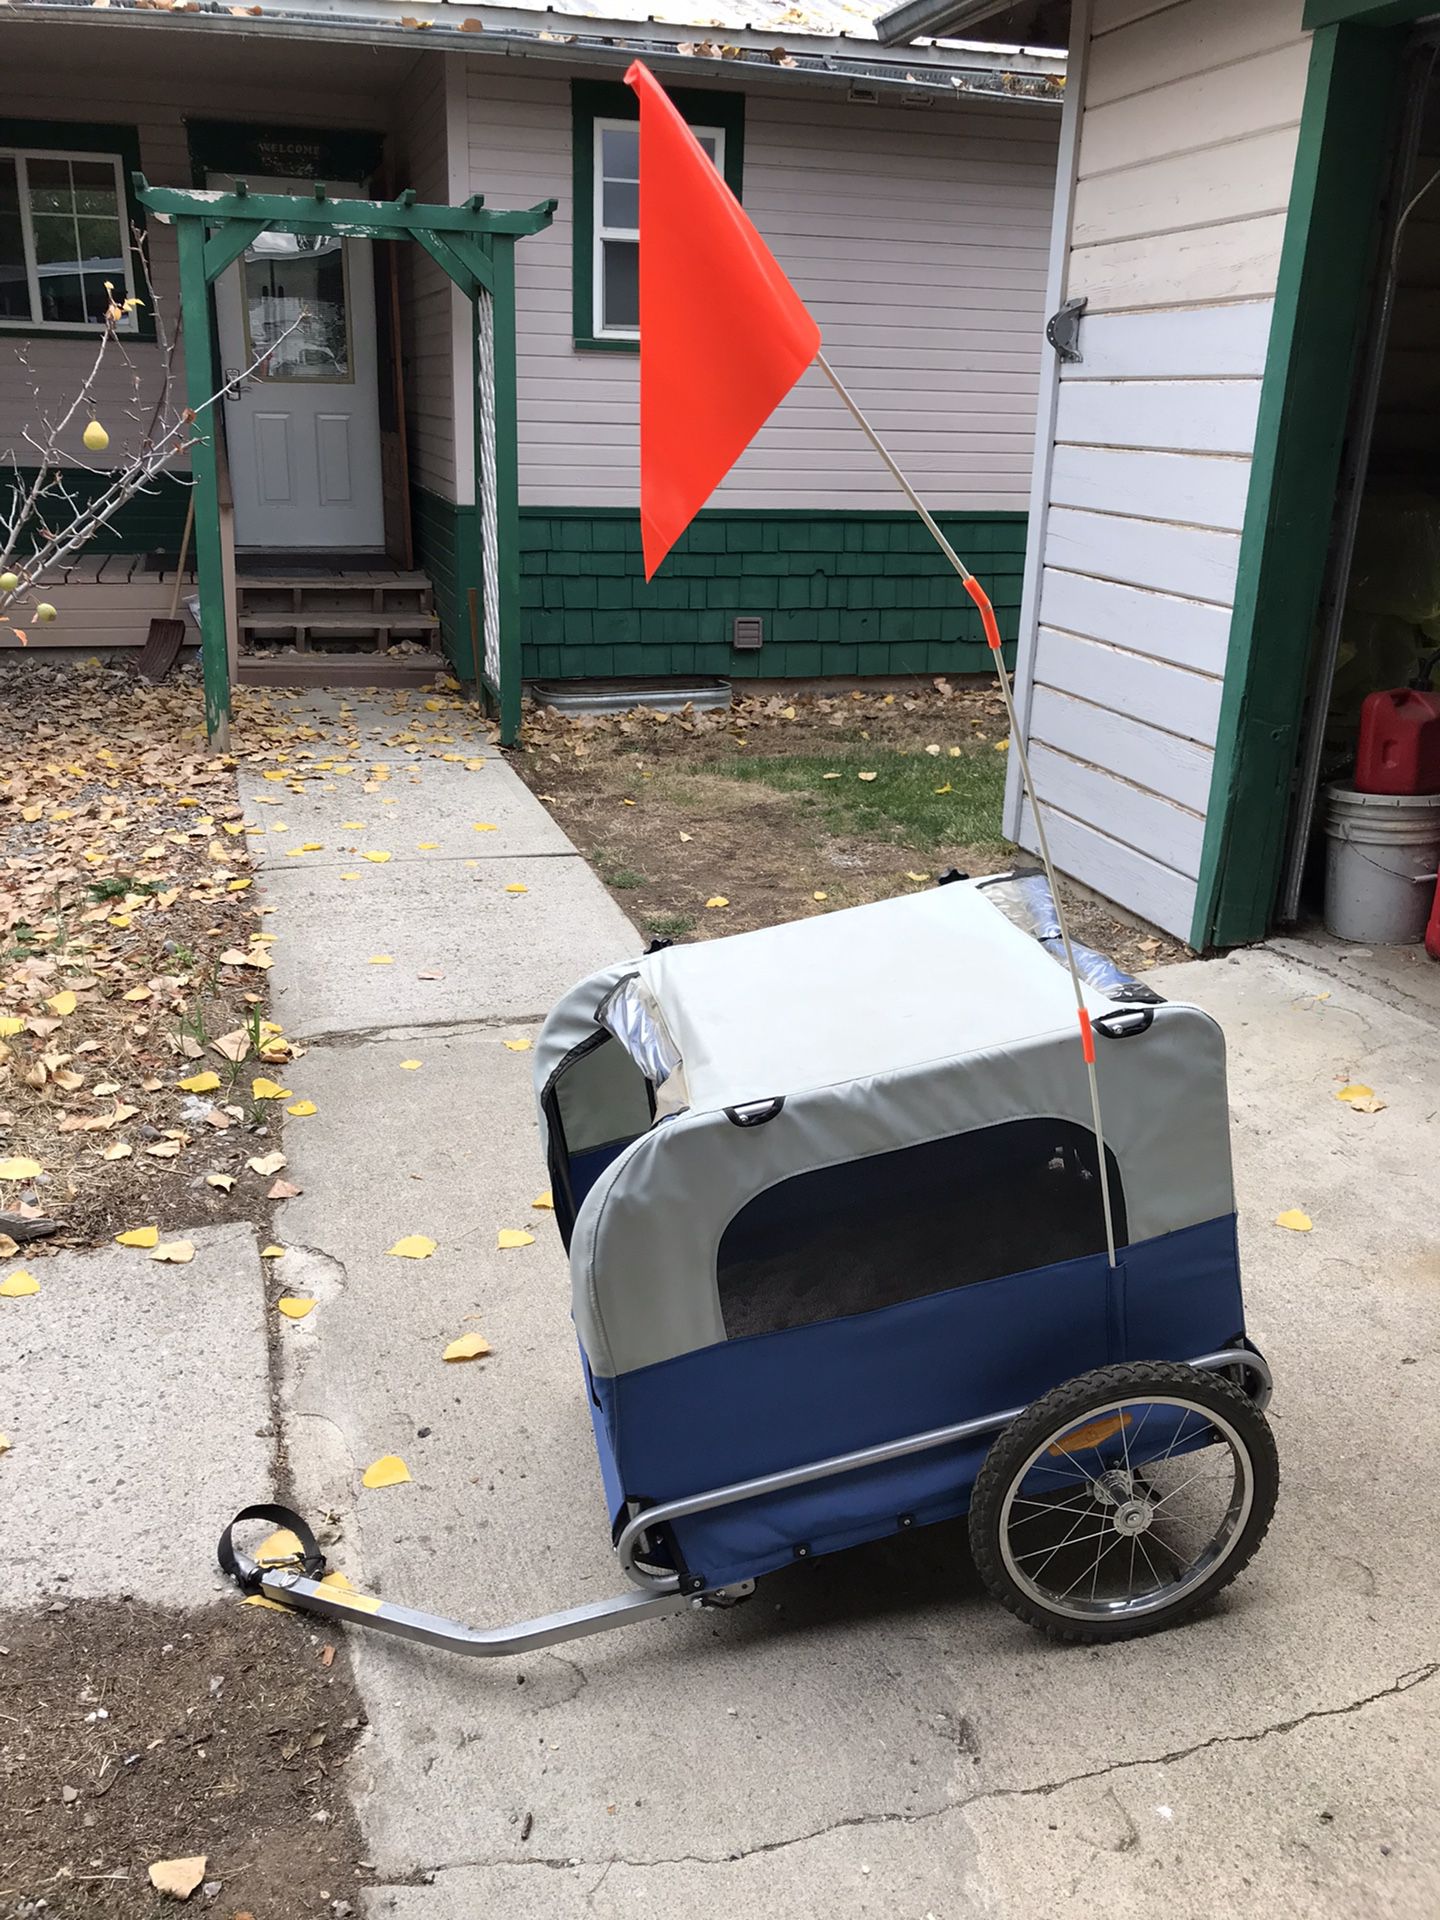 Pet Trailer for a Bicycle - never used